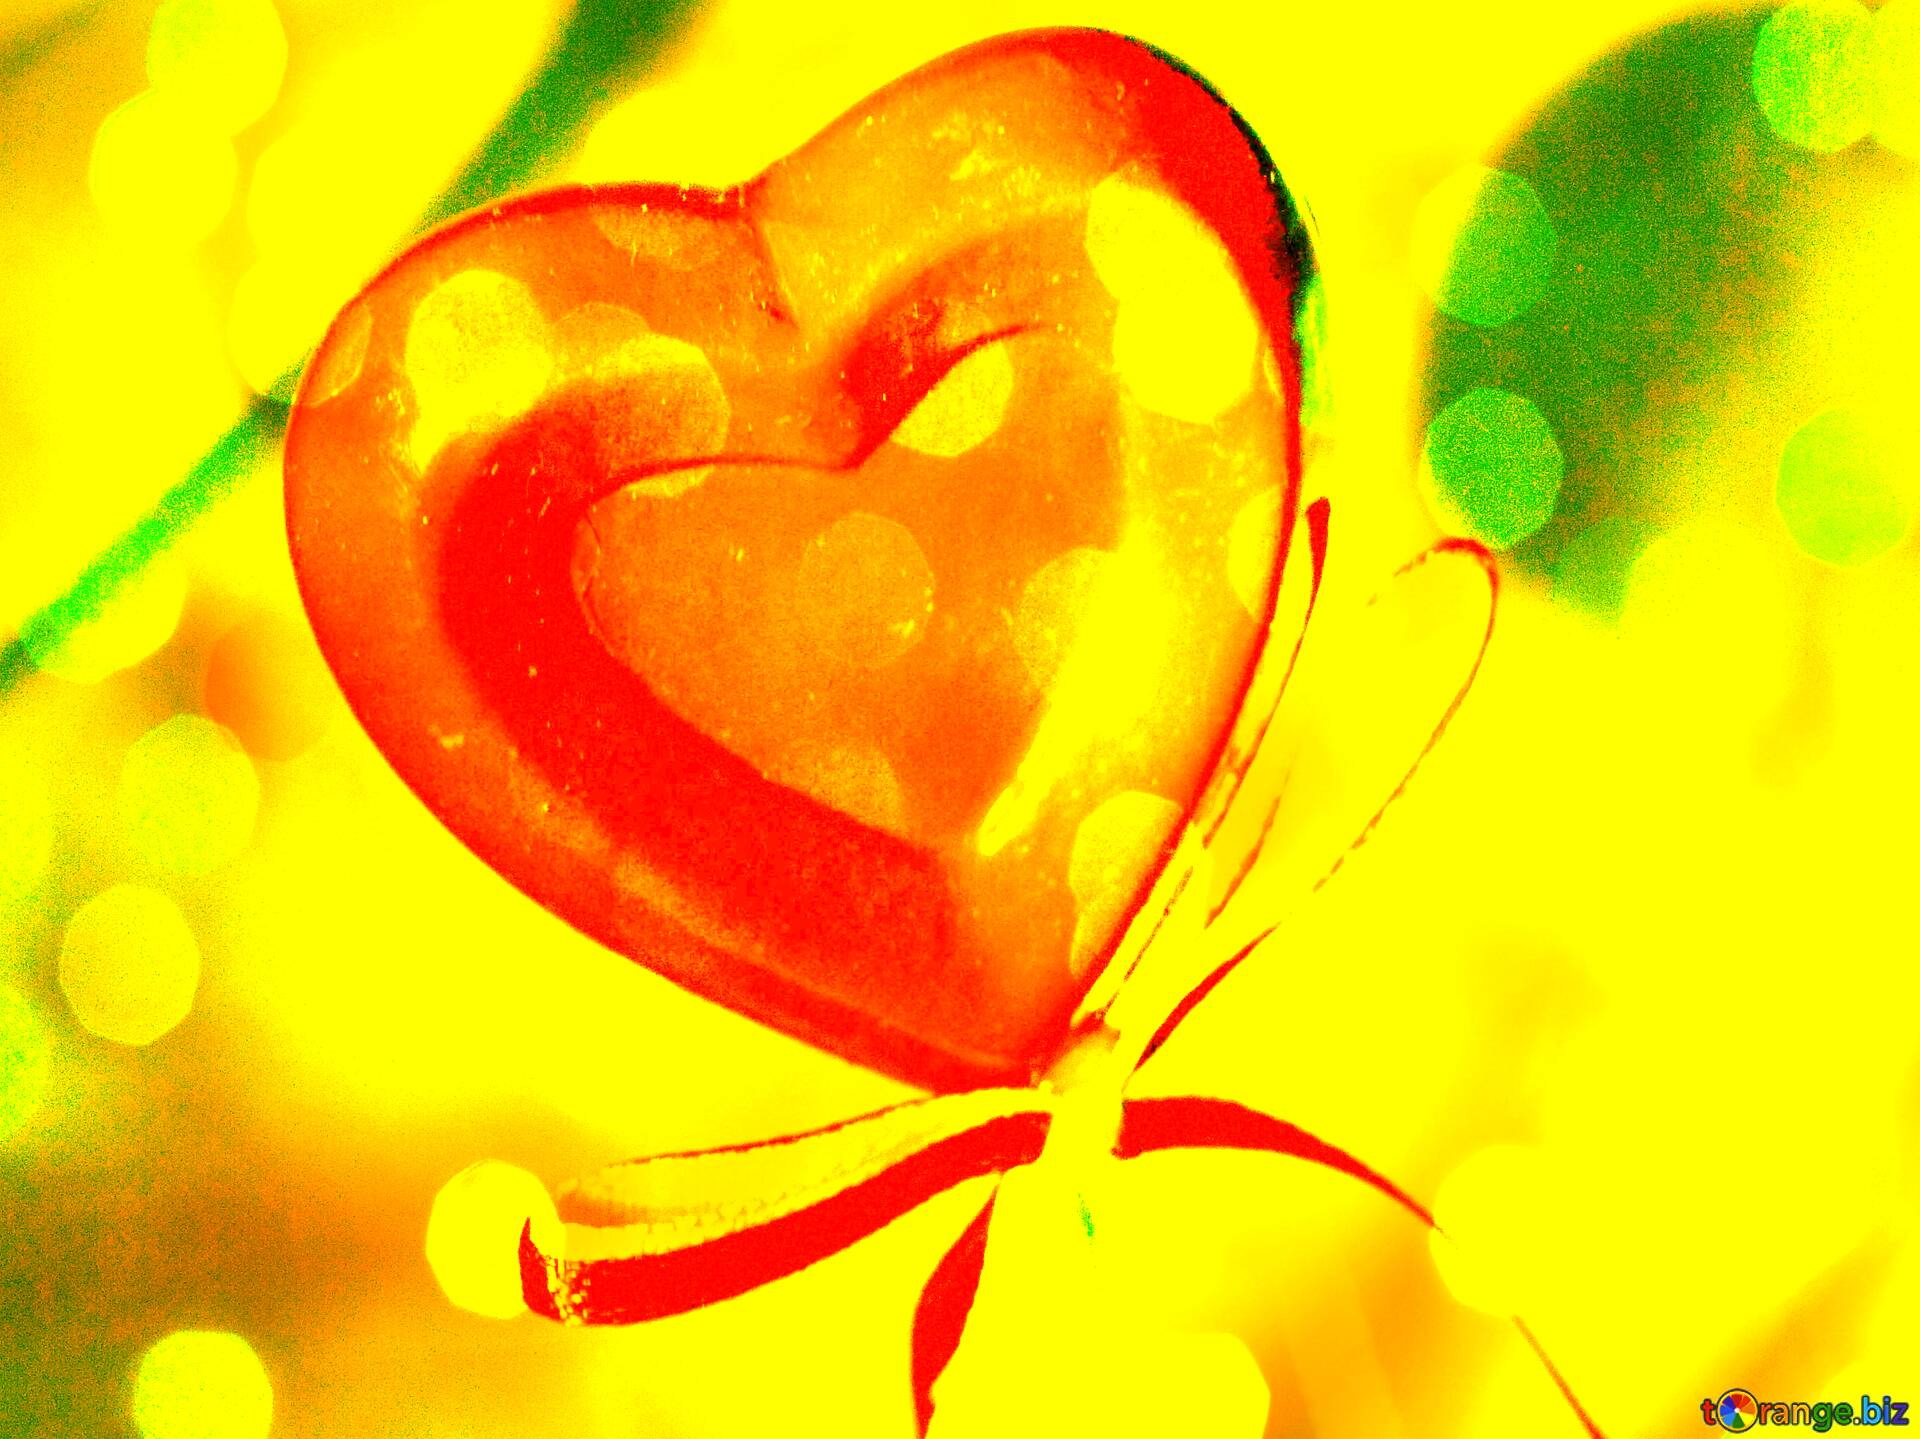 Download free picture valentines Day yellow background Congratulations  heart on CC-BY License ~ Free Image Stock  ~ fx №194095